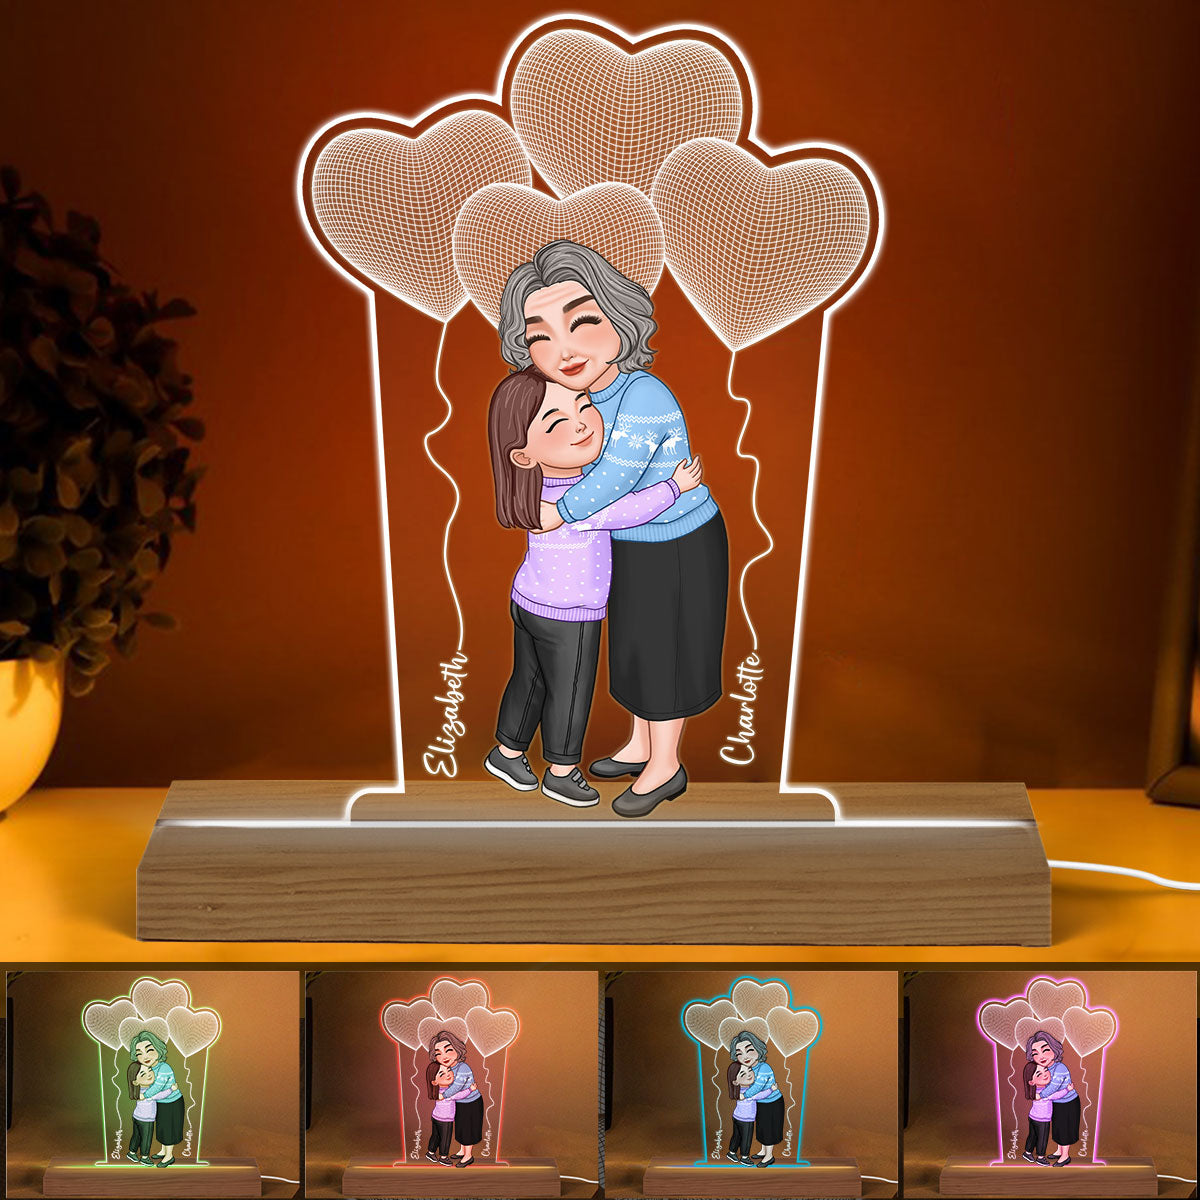 Grandma Grandkid Hugging Under 3D Balloons Personalized Custom Shaped Acrylic Plaque With LED Night Light